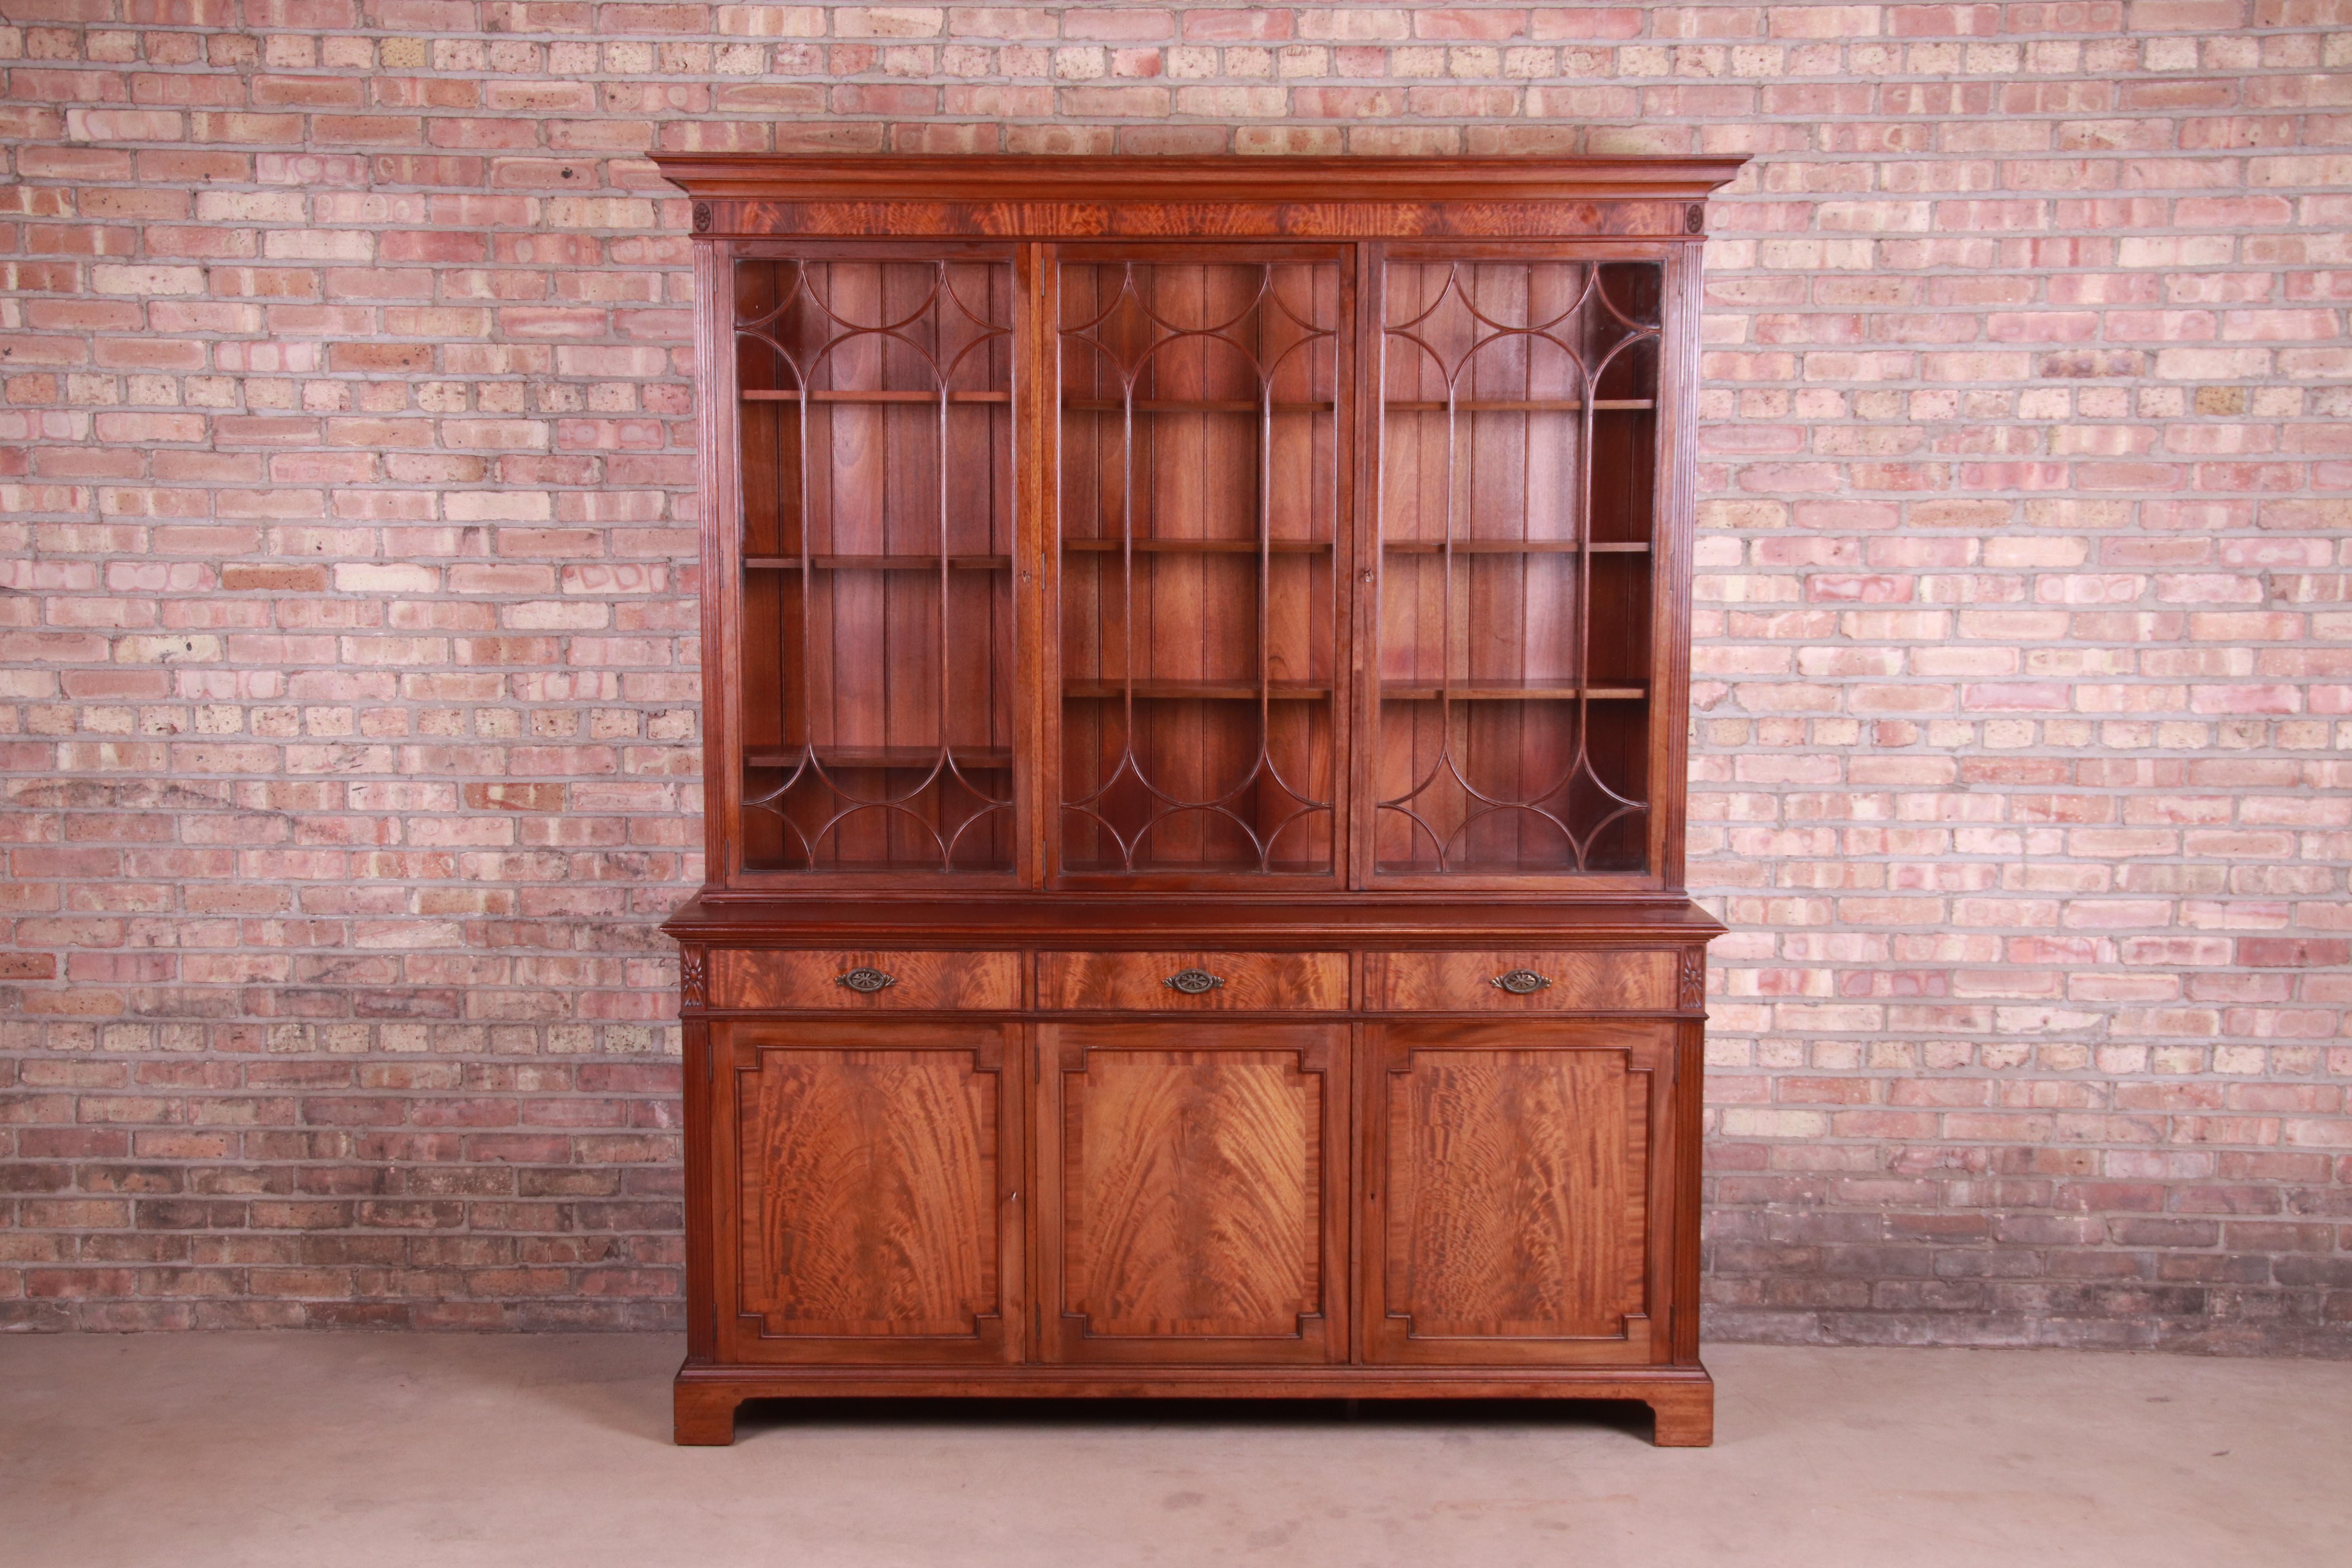 A gorgeous English Georgian breakfront bookcase cabinet

England, late 19th century

Book-matched flame mahogany, with mullioned glass front doors and original brass hardware. Cabinets lock, and key is included.

Measures: 72